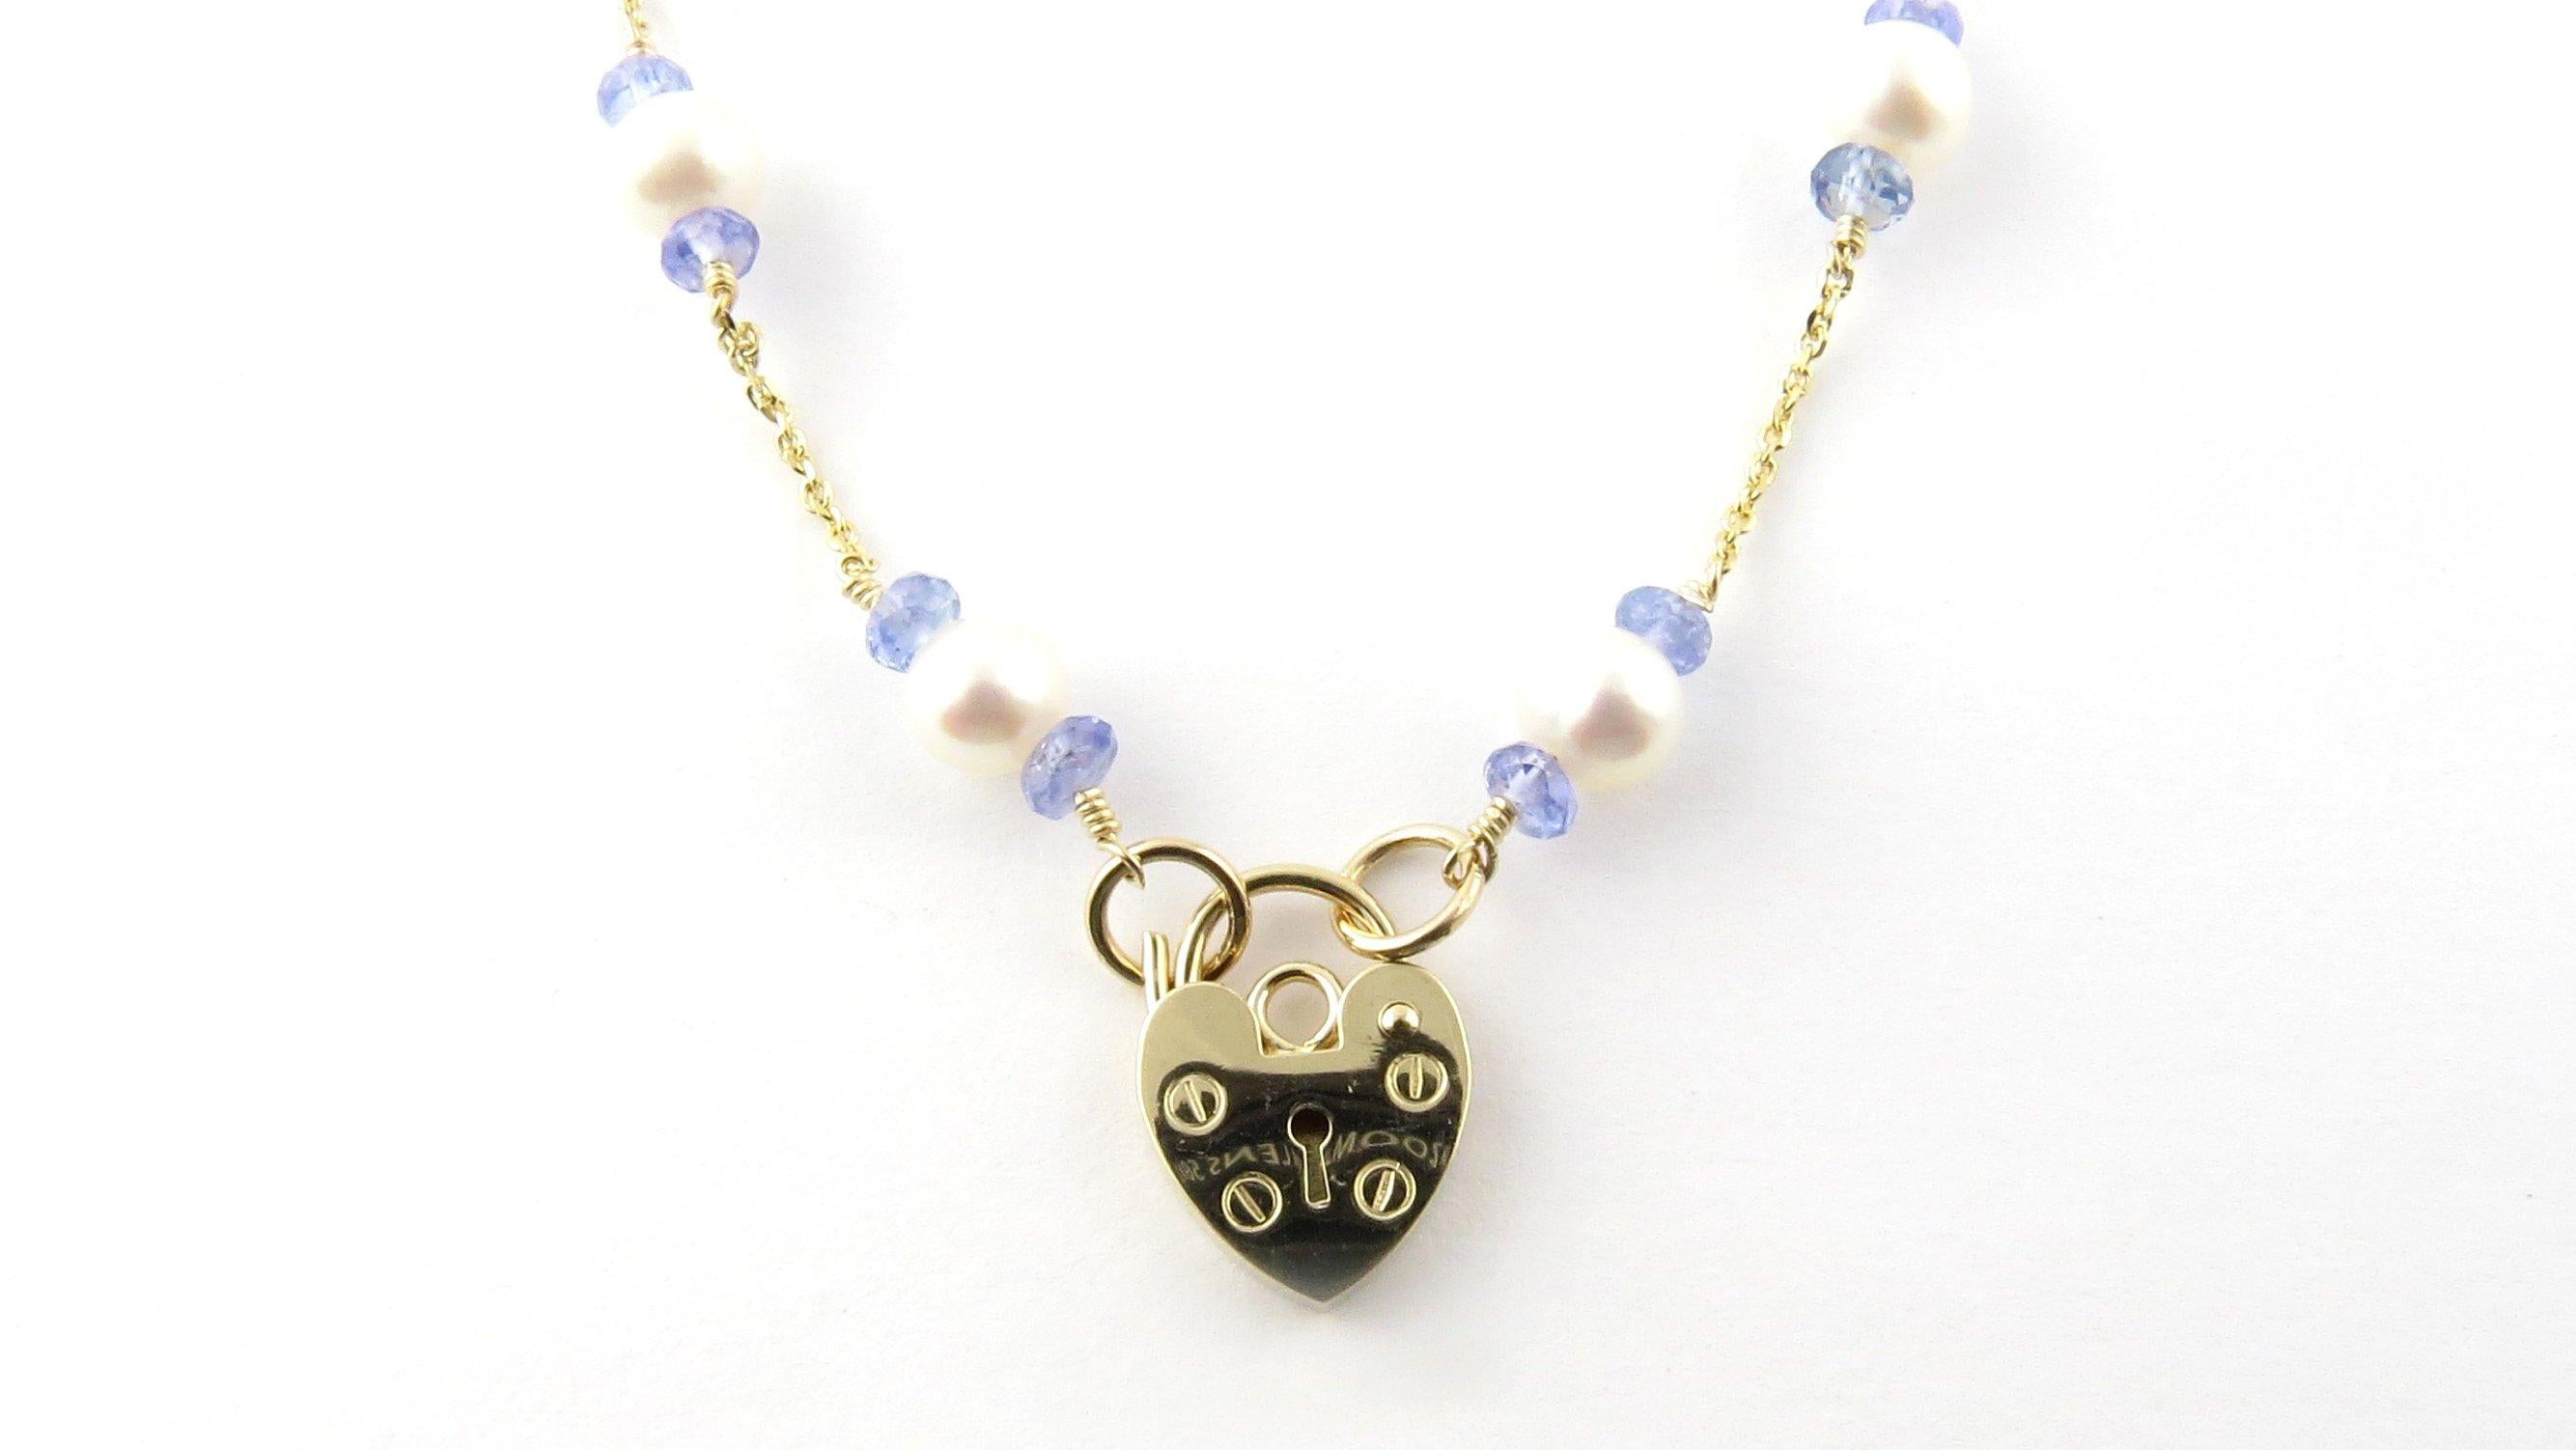 Vintage 14 Karat Yellow Gold Pearl and Blue Bead Necklace- 
This delicate 14K yellow gold necklace features 16 cultured pearls (5 mm each) accented with 32 blue beads and a lovely heart closure. 
Size: 16 inches 
Weight: 4.5 dwt. / 7.1 gr.